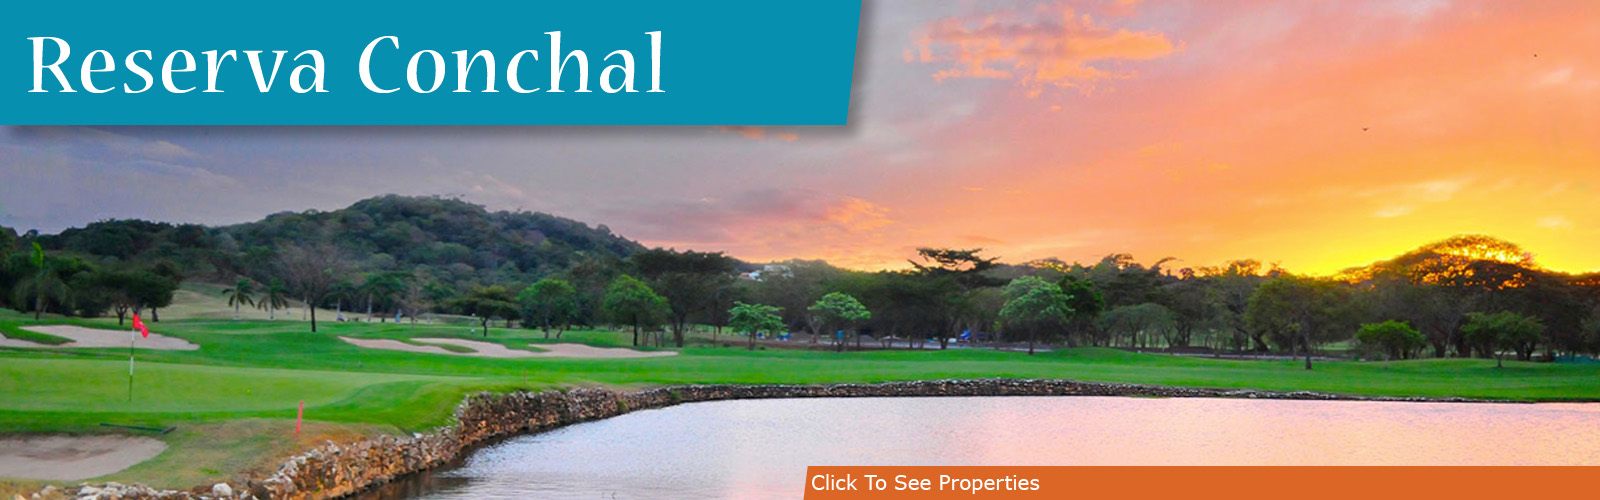 Reserva Conchal-Costa Rica Real Estate For Sale Homes Condos Villas Town Homes-Sunset